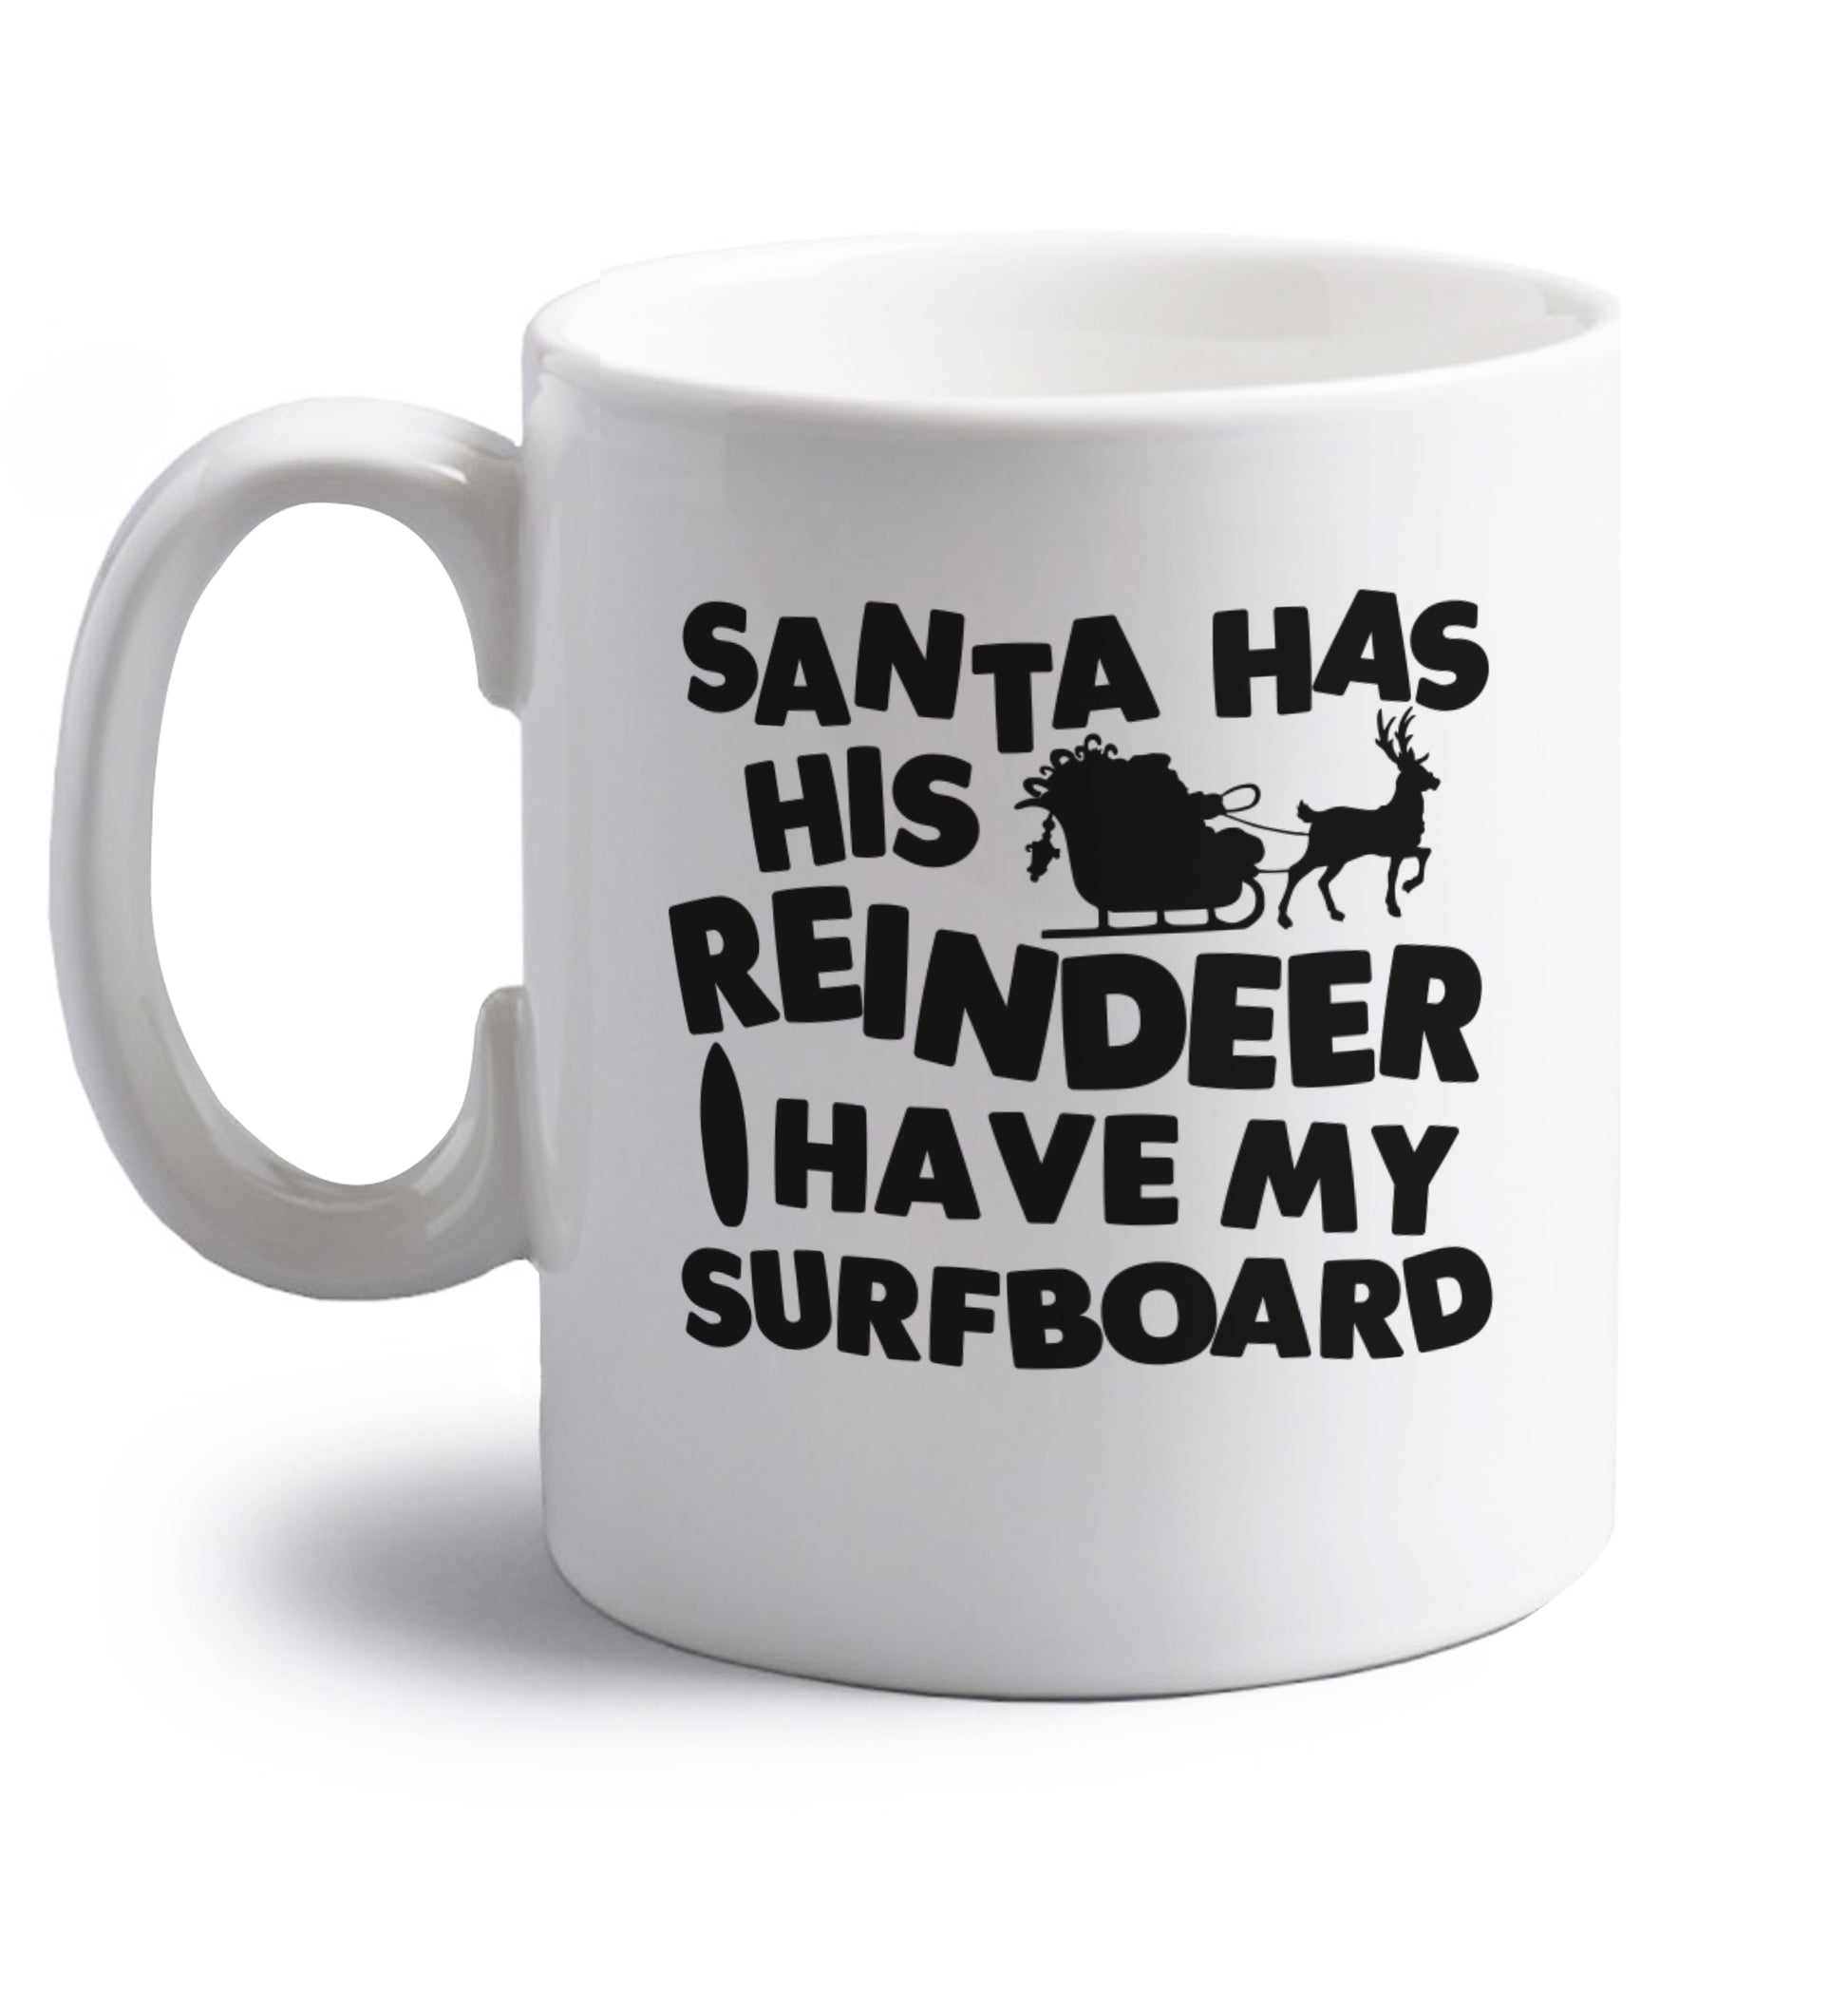 Santa has his reindeer I have my surfboard right handed white ceramic mug 